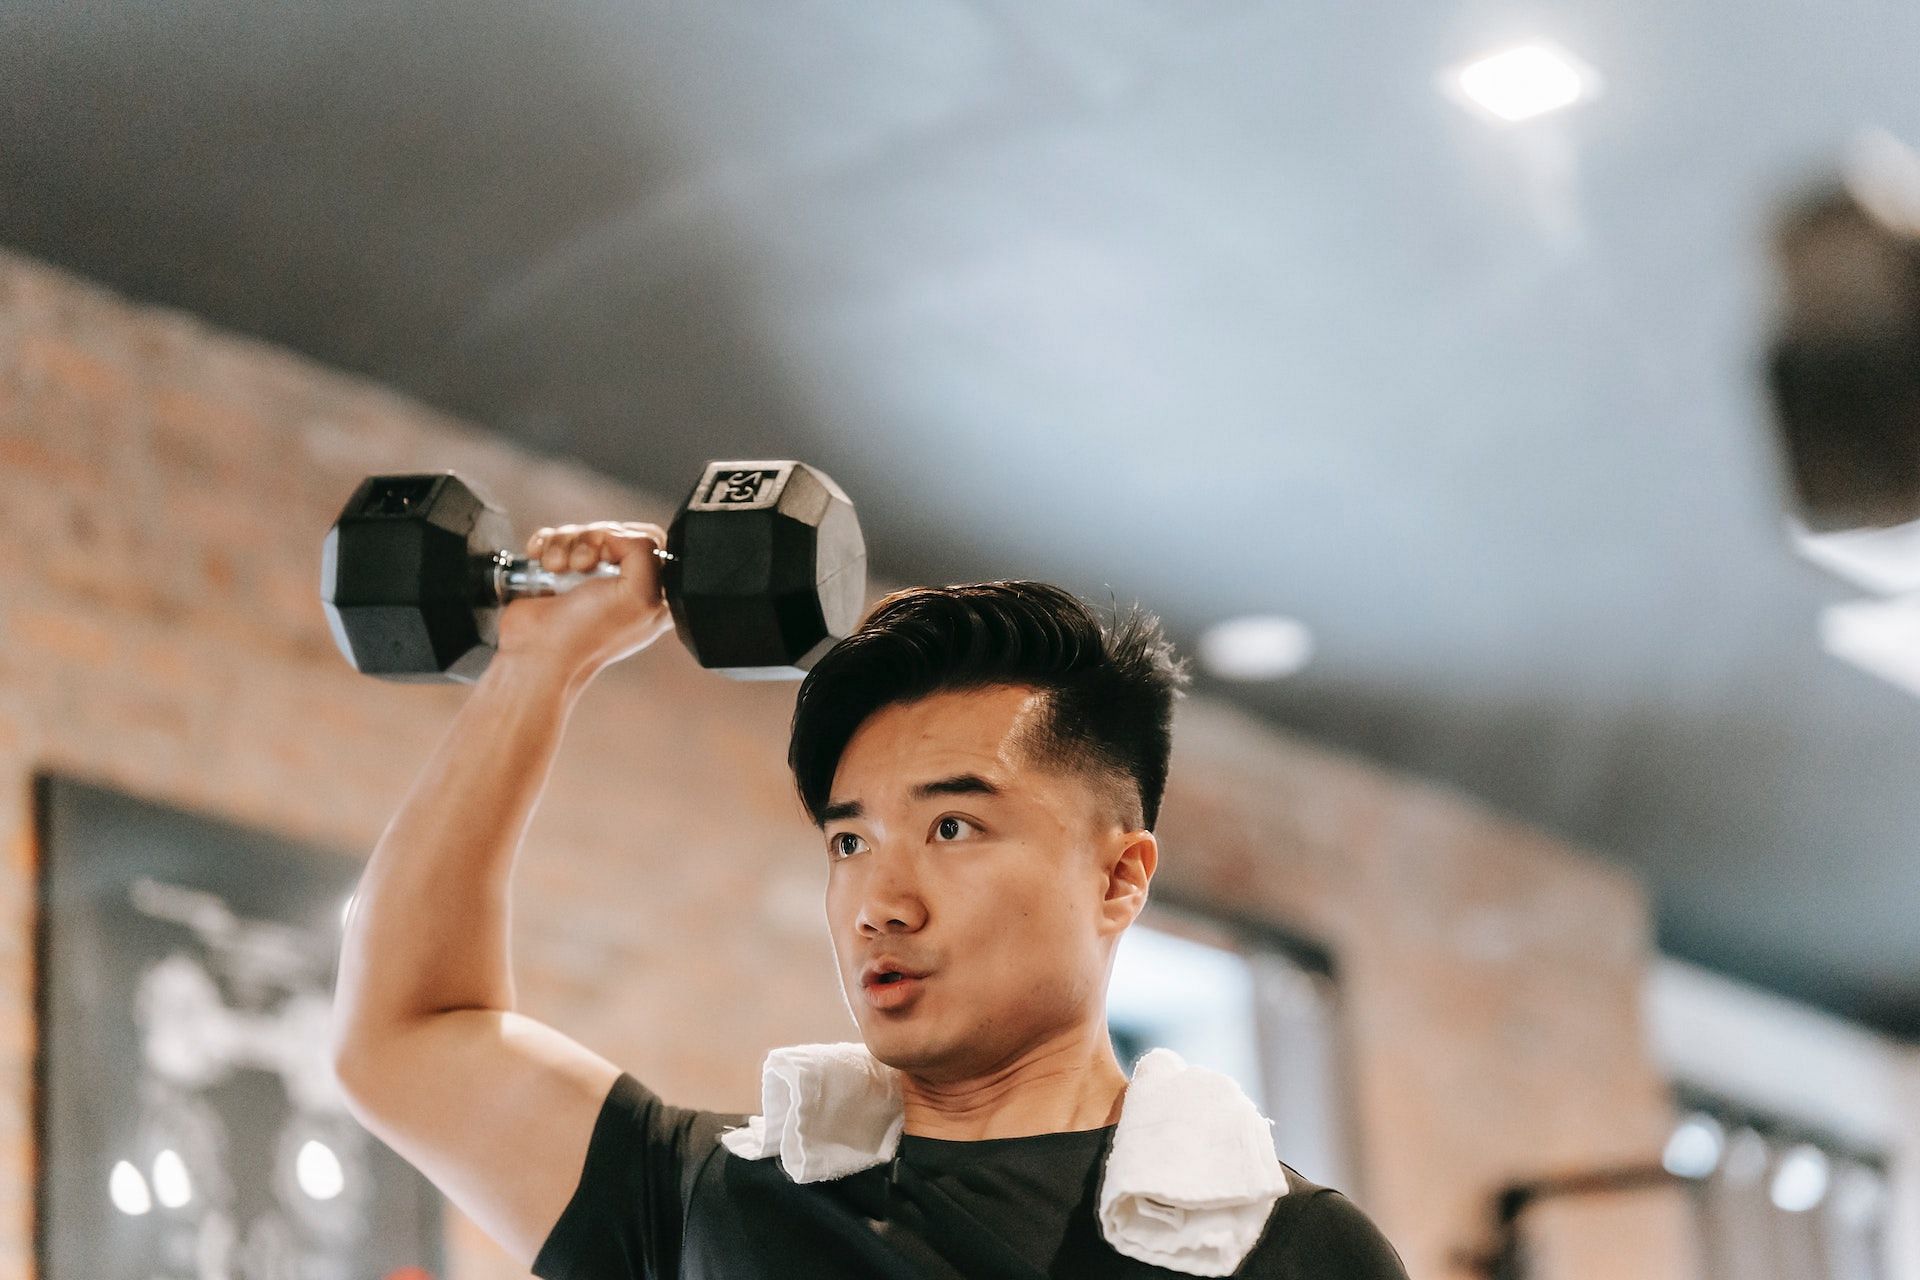 Dumbbell snatch is a full-body power exercise. (Photo via Pexels/Andres Ayrton)